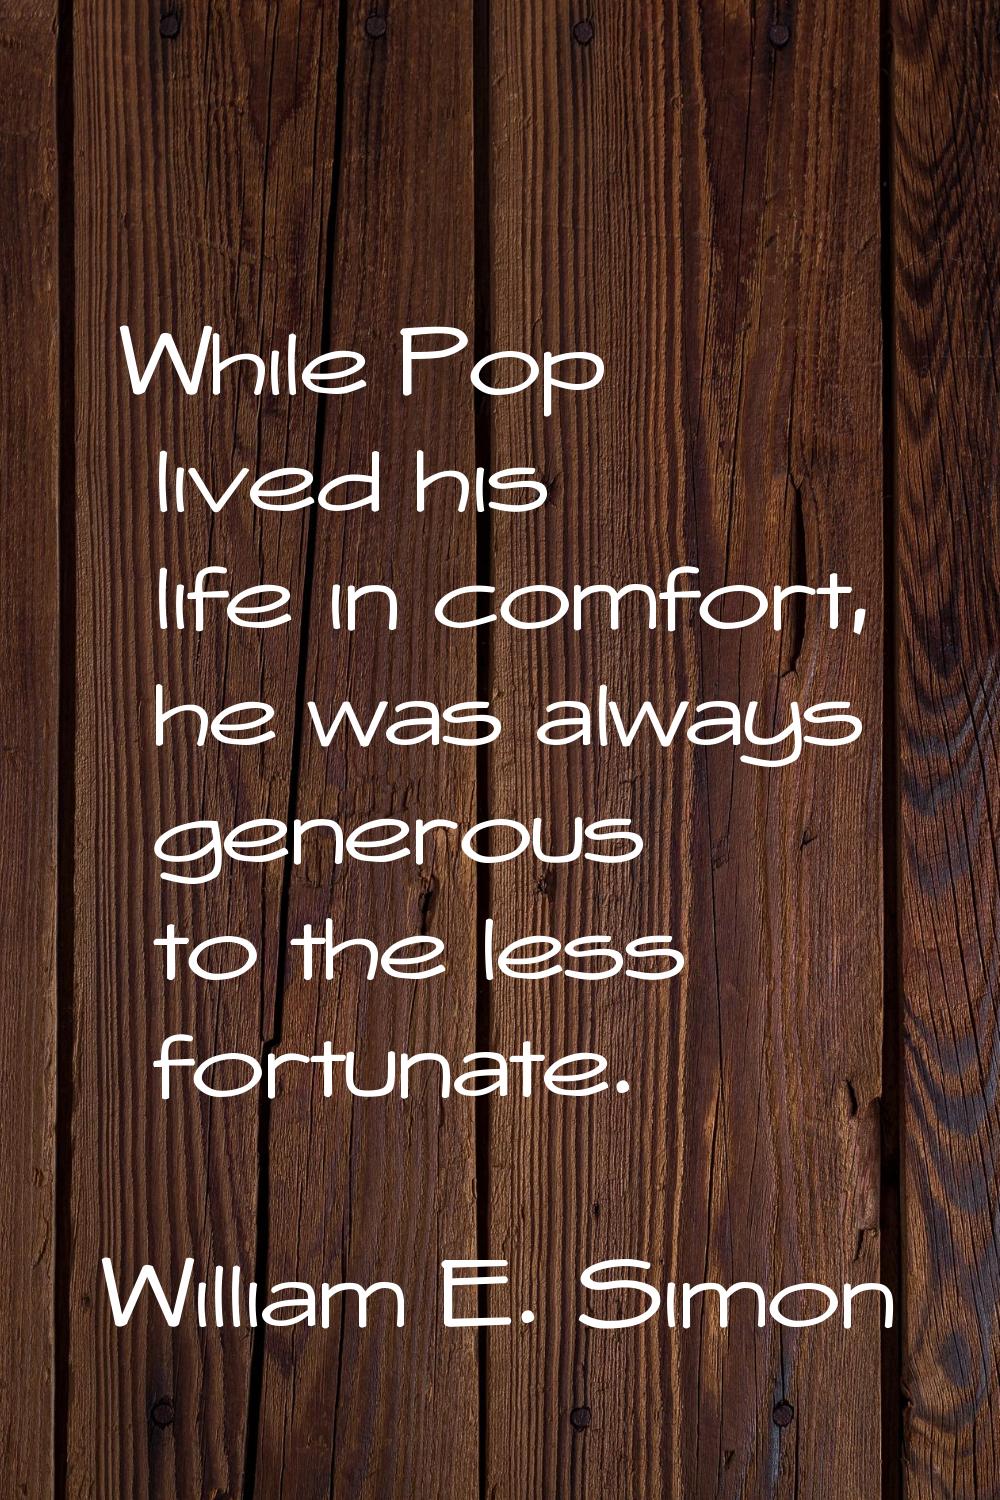 While Pop lived his life in comfort, he was always generous to the less fortunate.